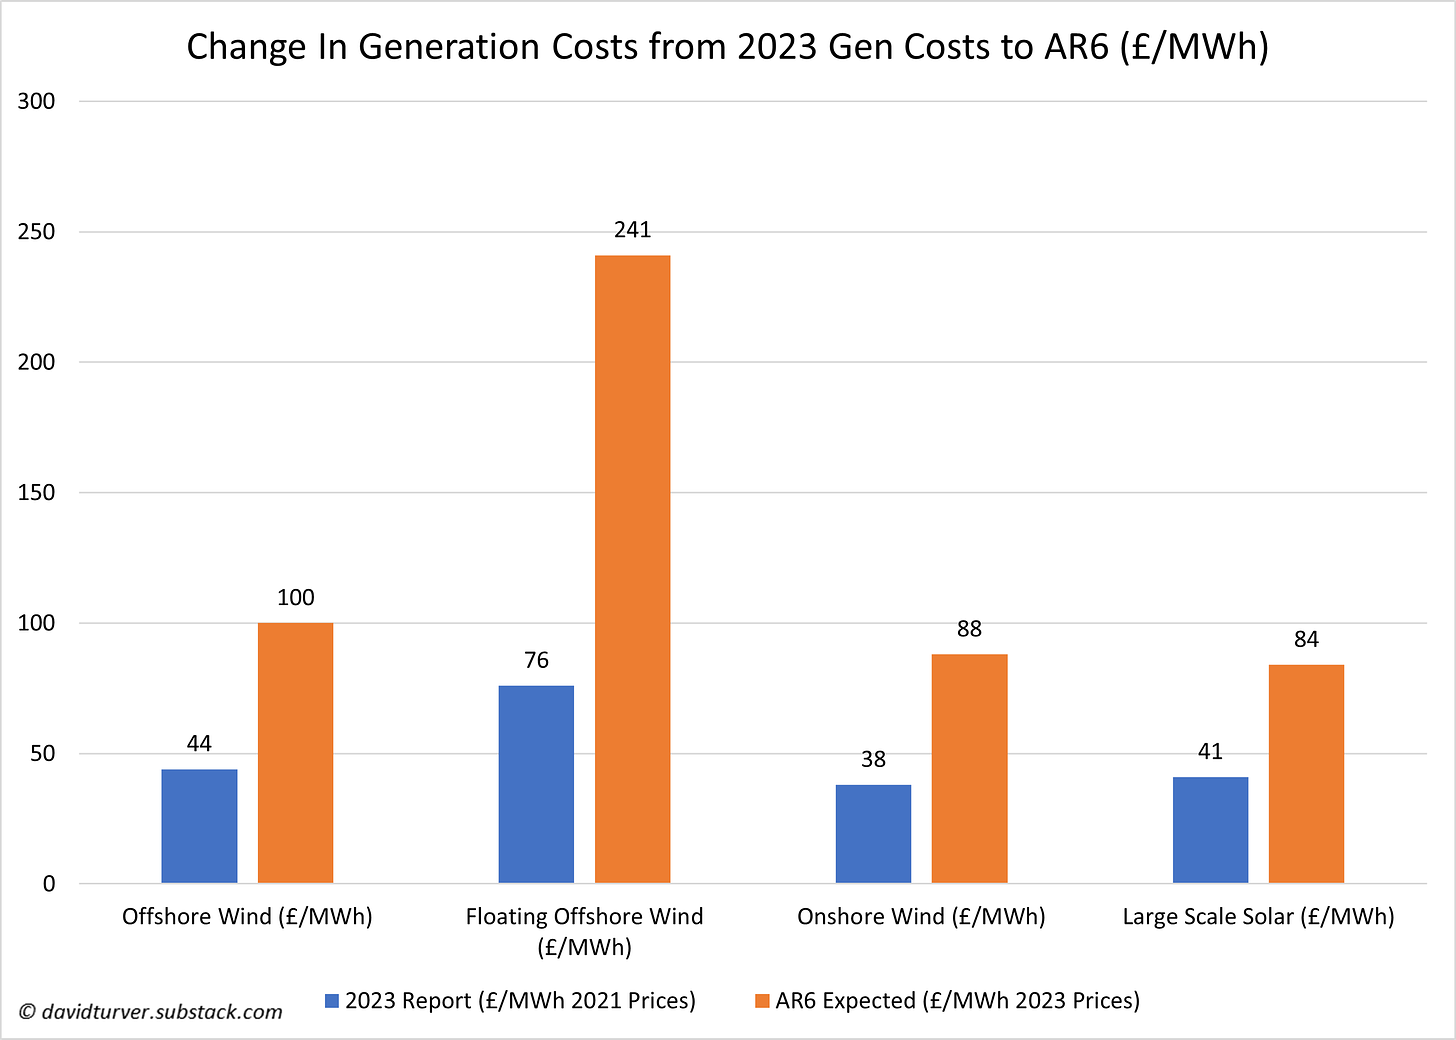 Figure 1 - Change in Renewable Generation Costs from 2023 Gen Costs Report to AR6 Expectations (£ per MWh)